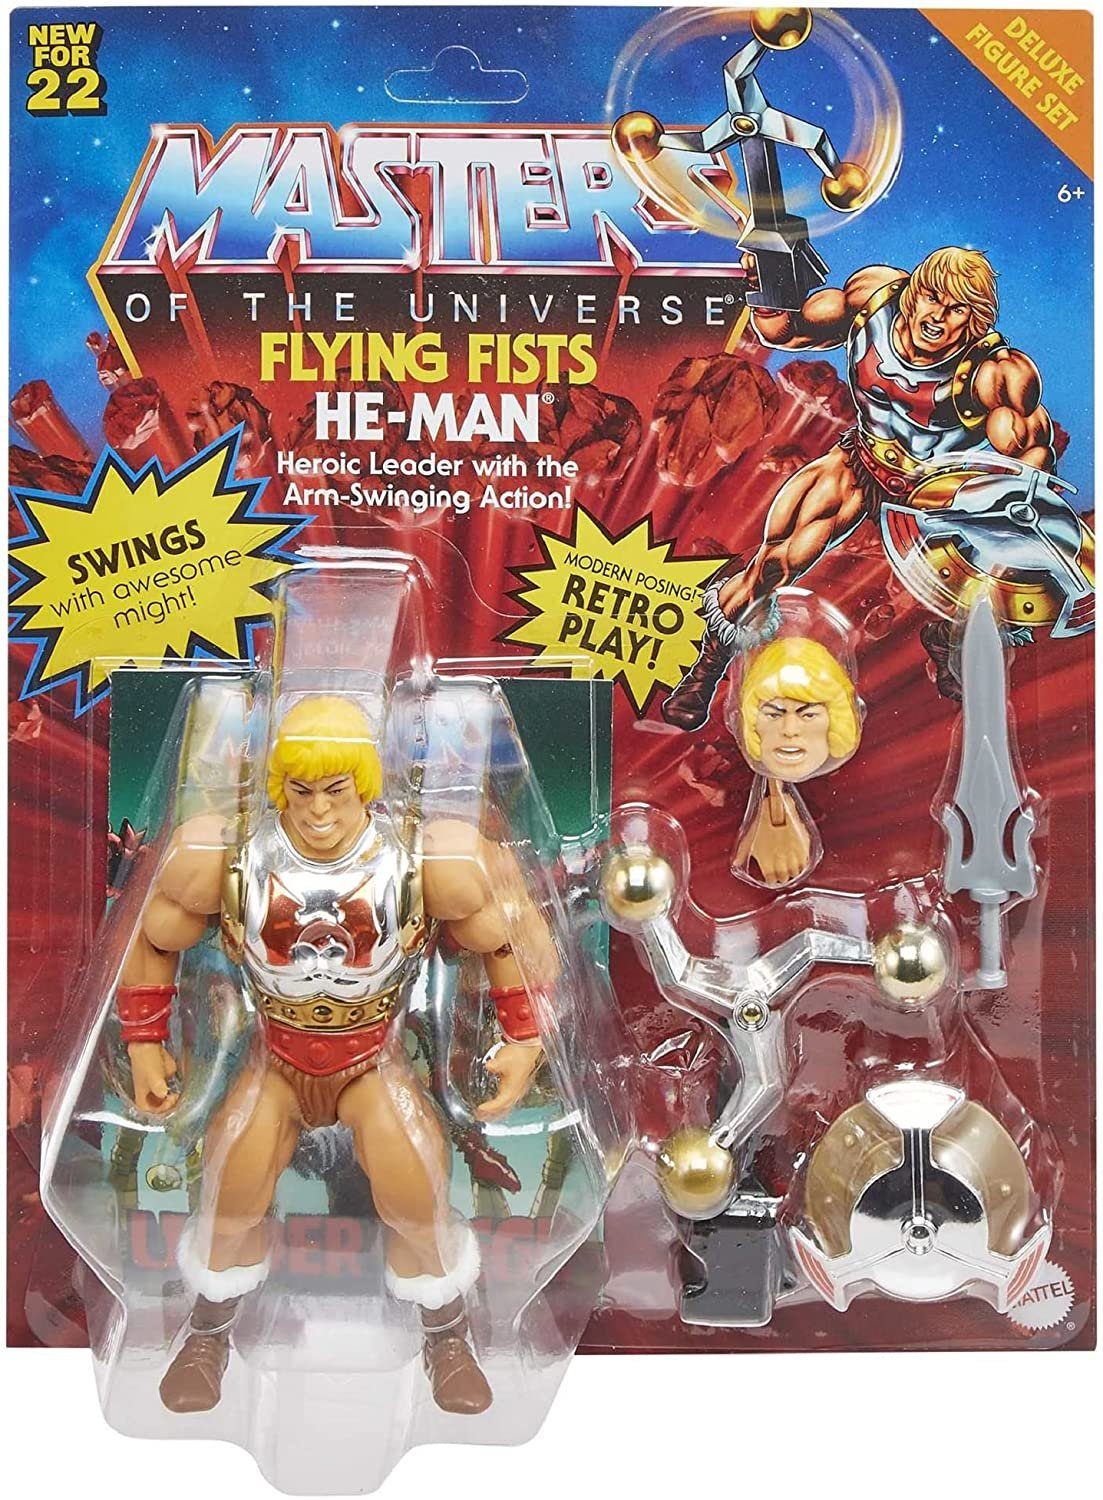 14 Fists of Actionfigur cm - Deluxe He-Man Universe Spielset the Mattel® - - Masters Flying